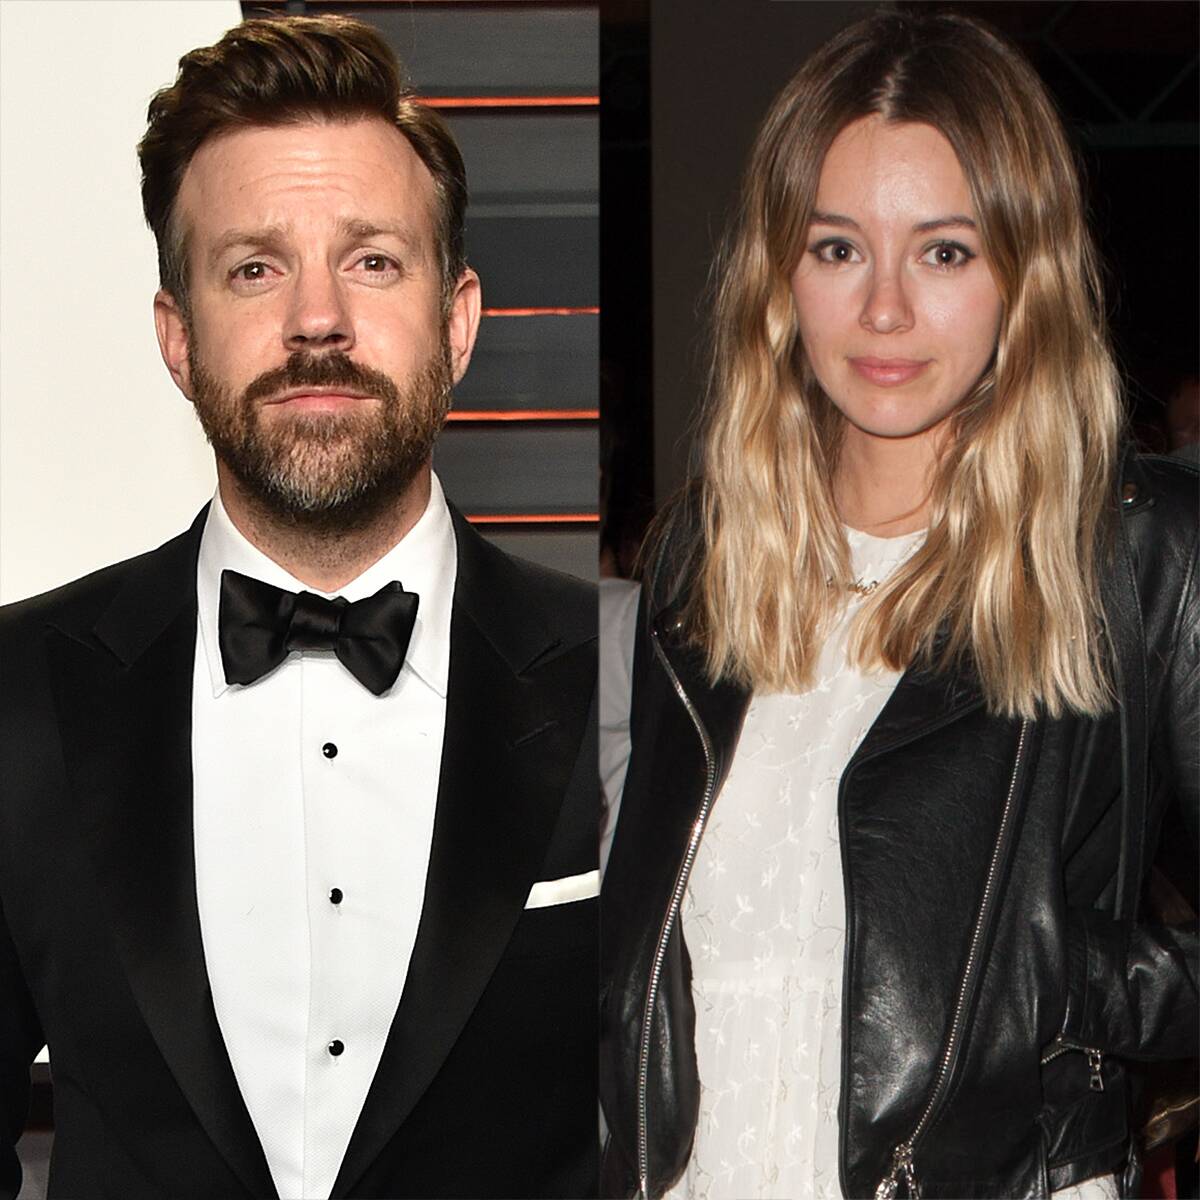 Here's What's Really Going on With Jason Sudeikis and British Model Keeley Hazell